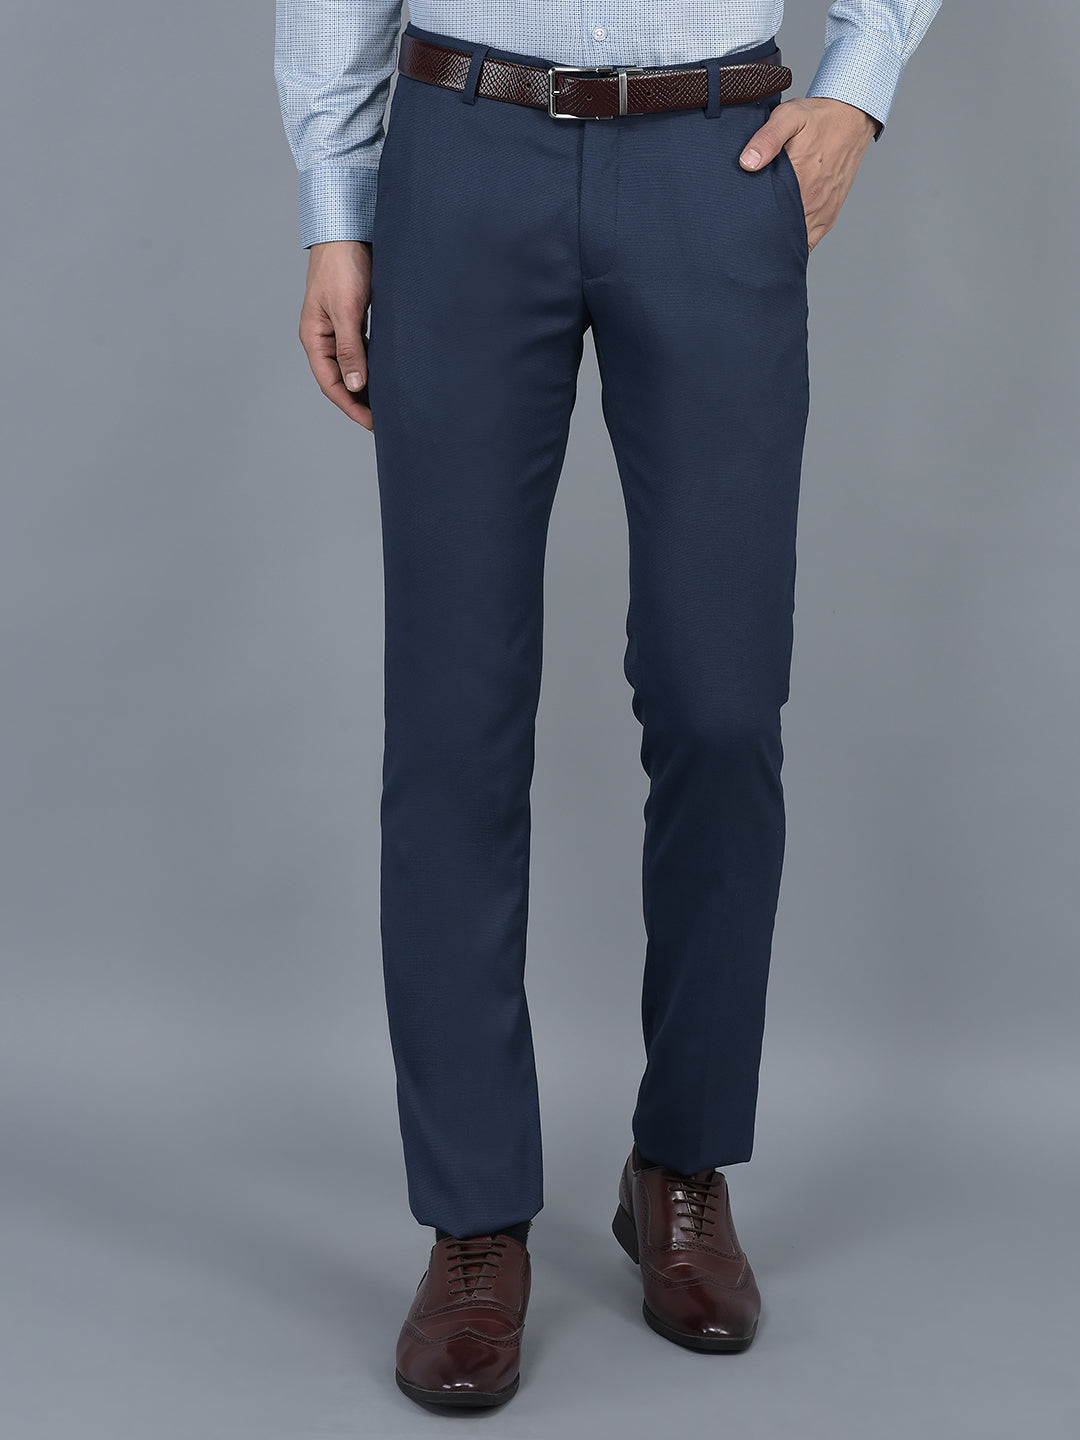 10 Classic Navy Blue Dress Pants Outfits For Men – Outfit, 44% OFF